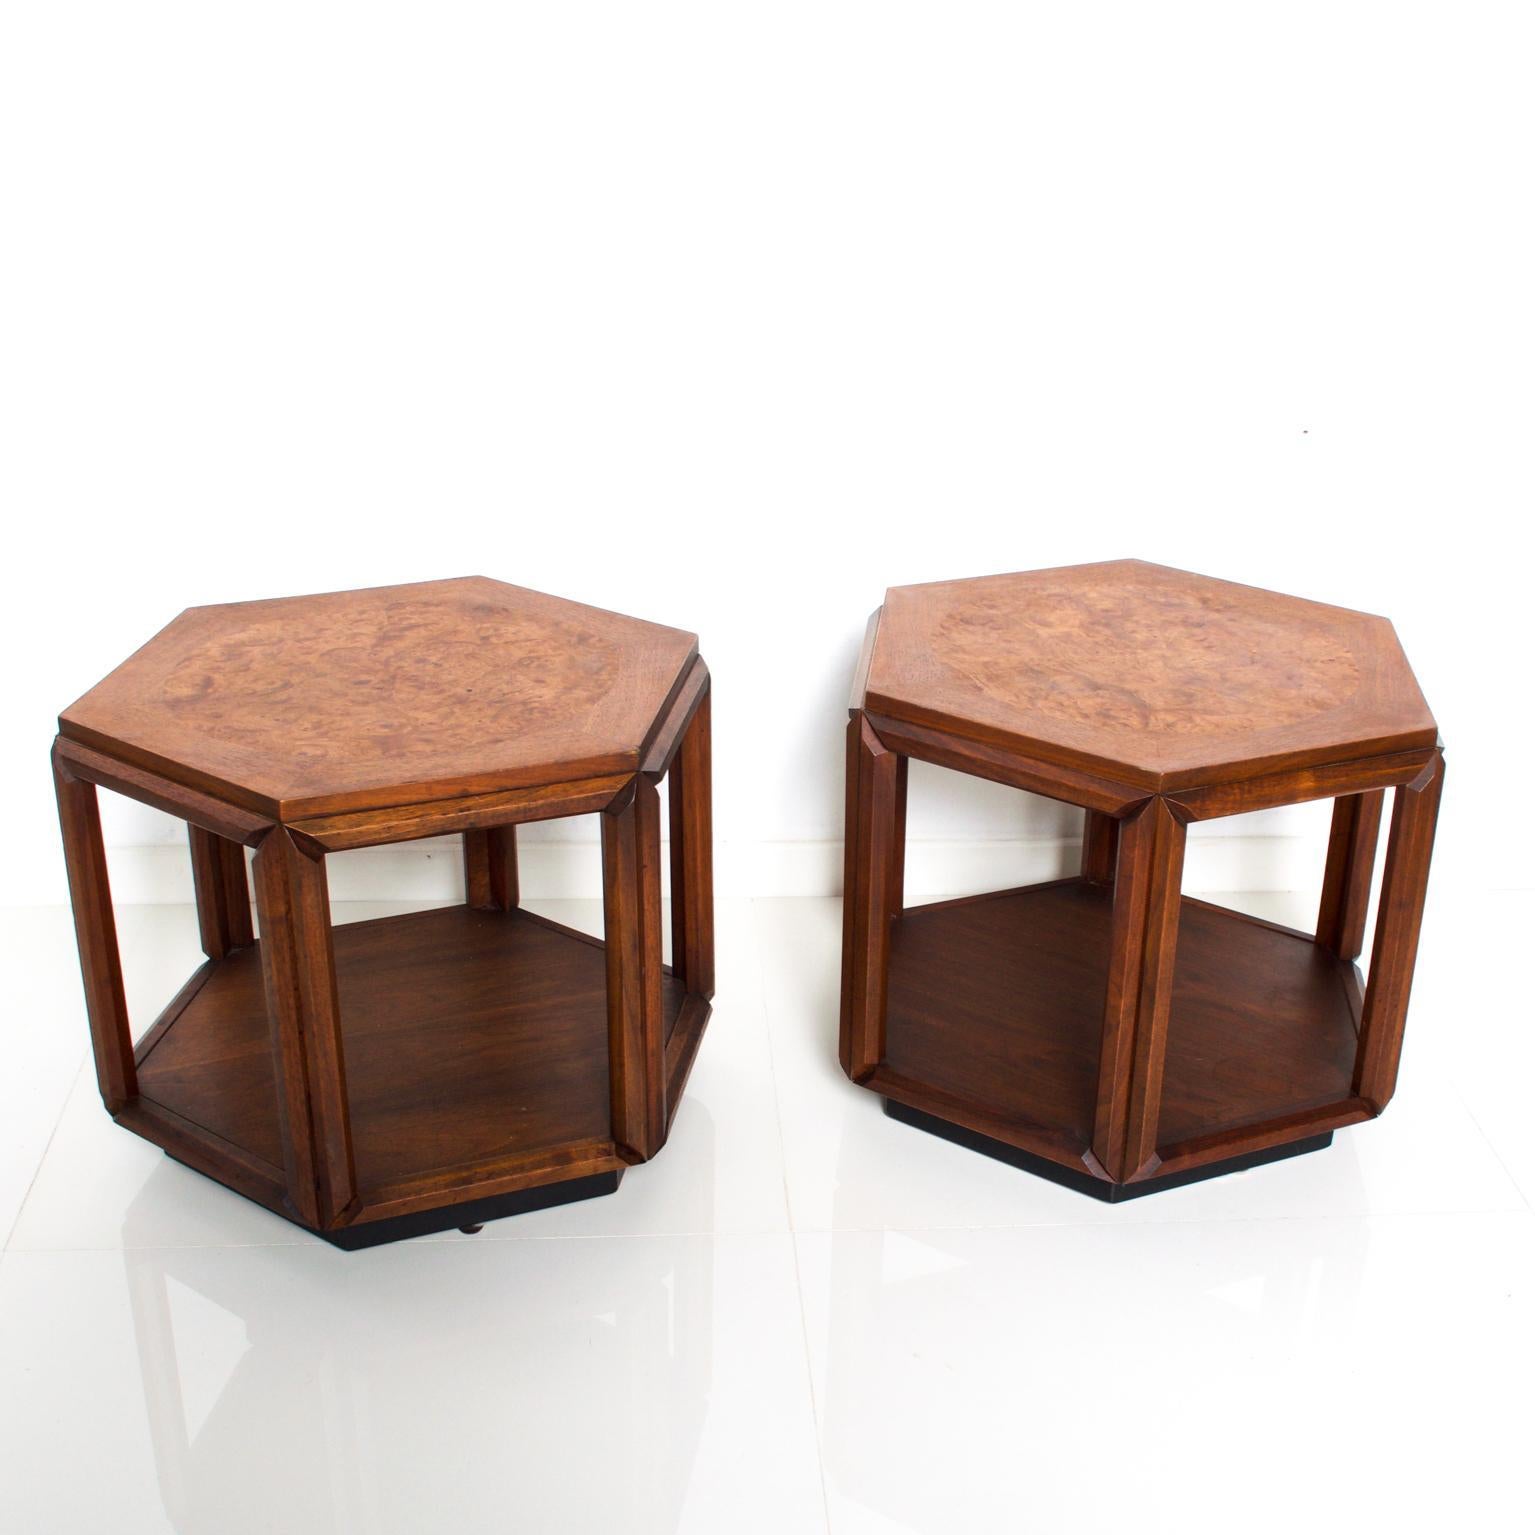 We are pleased to offer for your consideration a beautiful pair of side tables by John Keal for Brown Saltman. 1960s USA
Walnut wood with a hexagonal shape. The top has a burl wood inlay in the center with a circle shape.
Only one of the tables